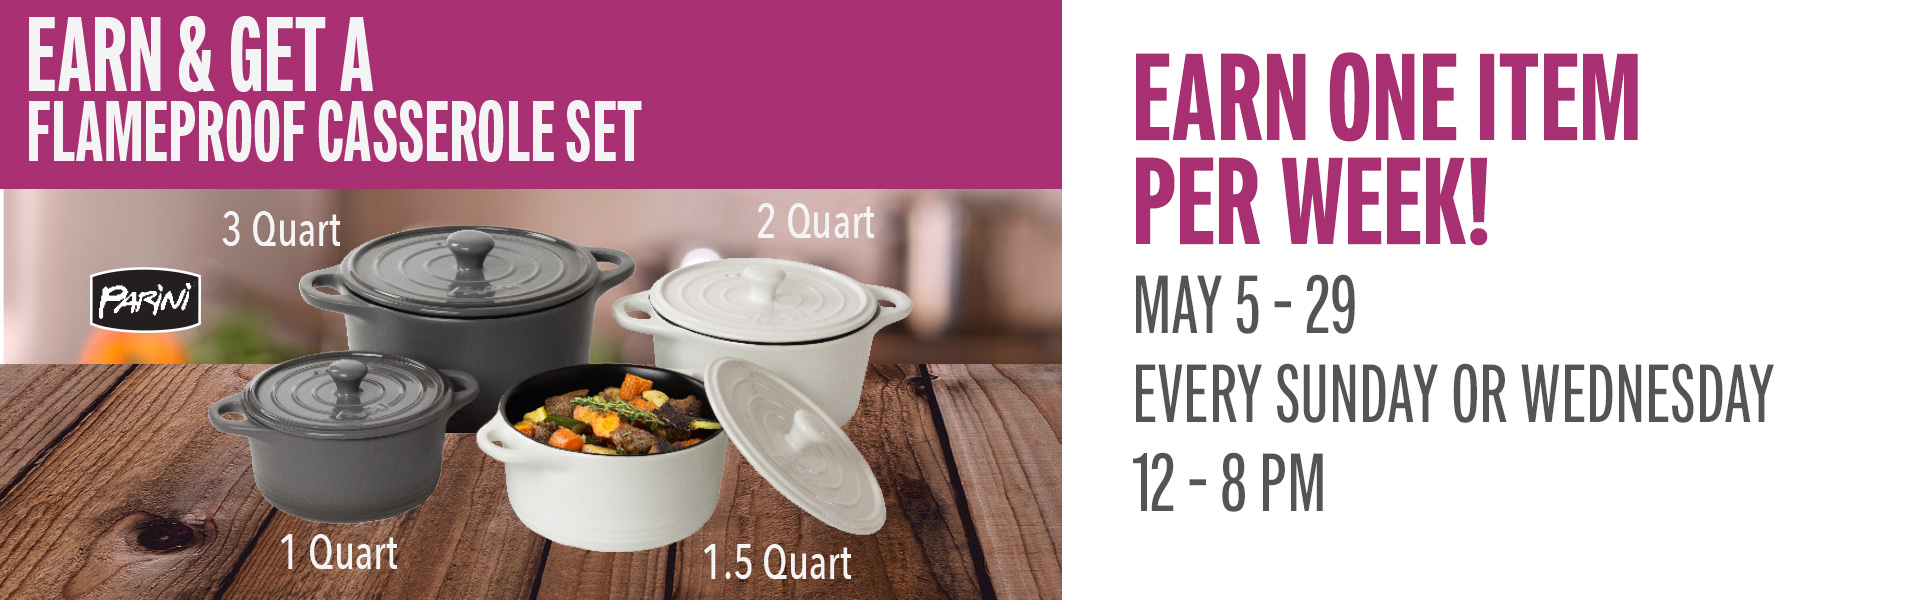 Earn 75 points on Sundays or Wednesdays and receive a casserole dish item!